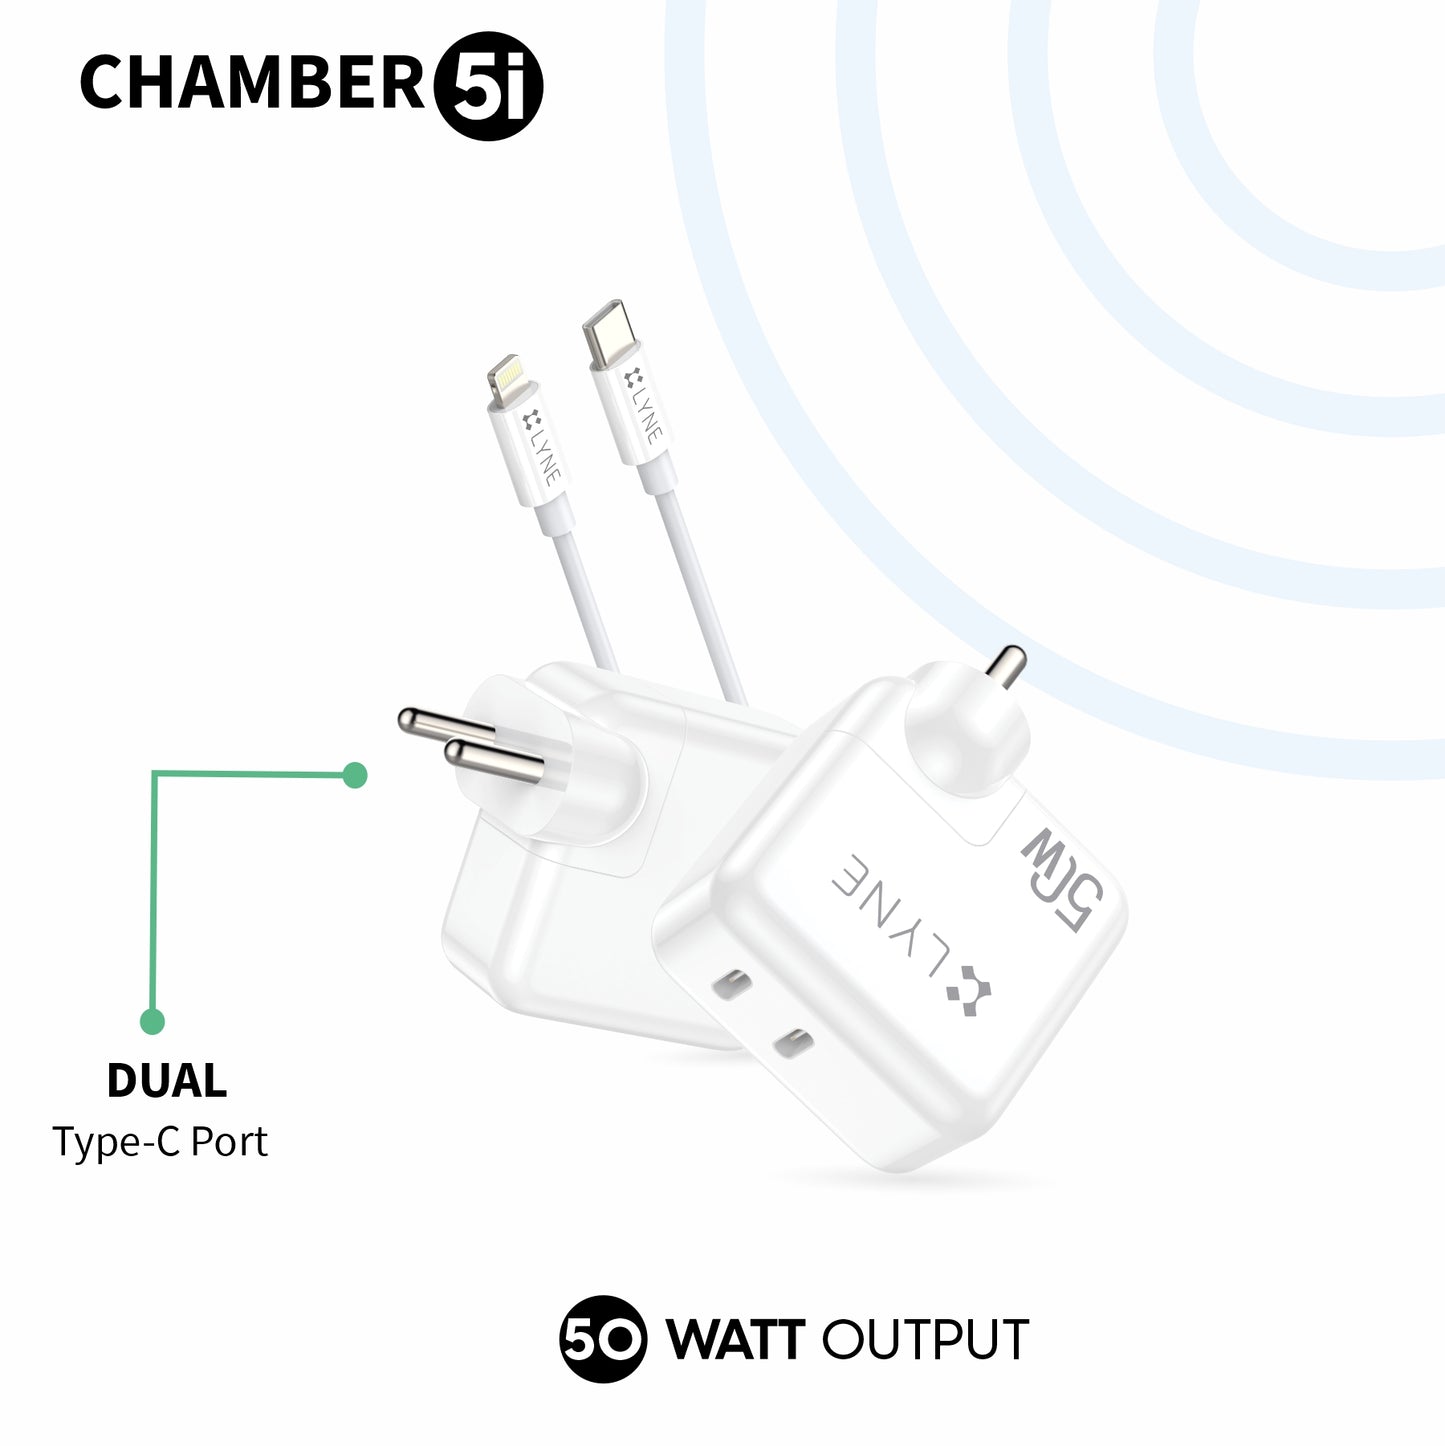 LYNE Chamber 5i  50W Output, Auto Cut Off, Dual Type-C Port With Type-C to Lightning Cable